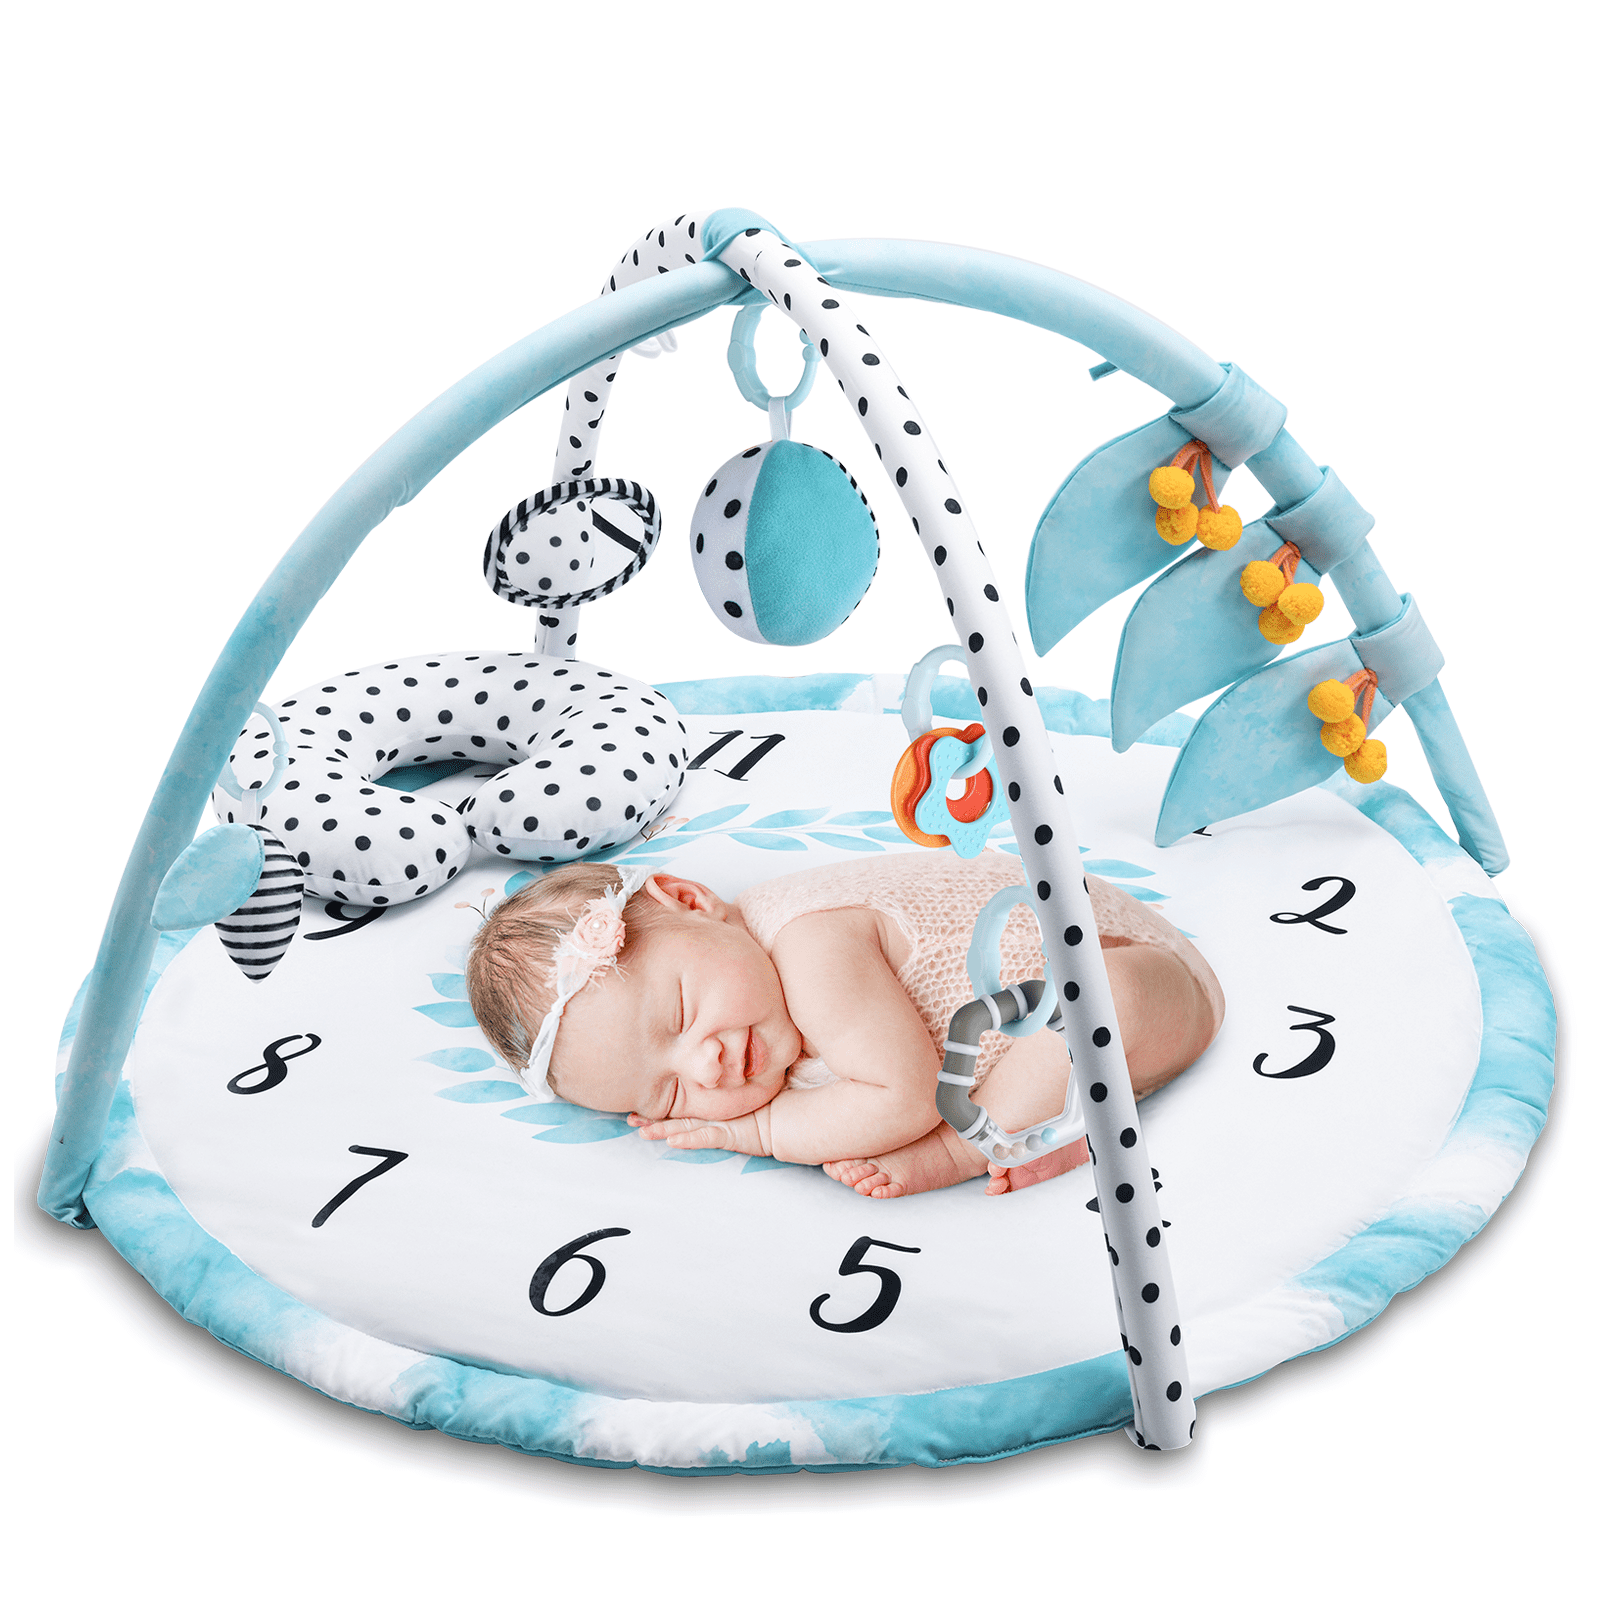 Hearing Lupantte 7 in 1 Baby Play Gym Mat with 2 Replaceable Washable Mat Covers Baby Activity Play Mat with 6 Toys Visual Cognitive Development for Infant and Toddler Thicker Non Slip Touch 